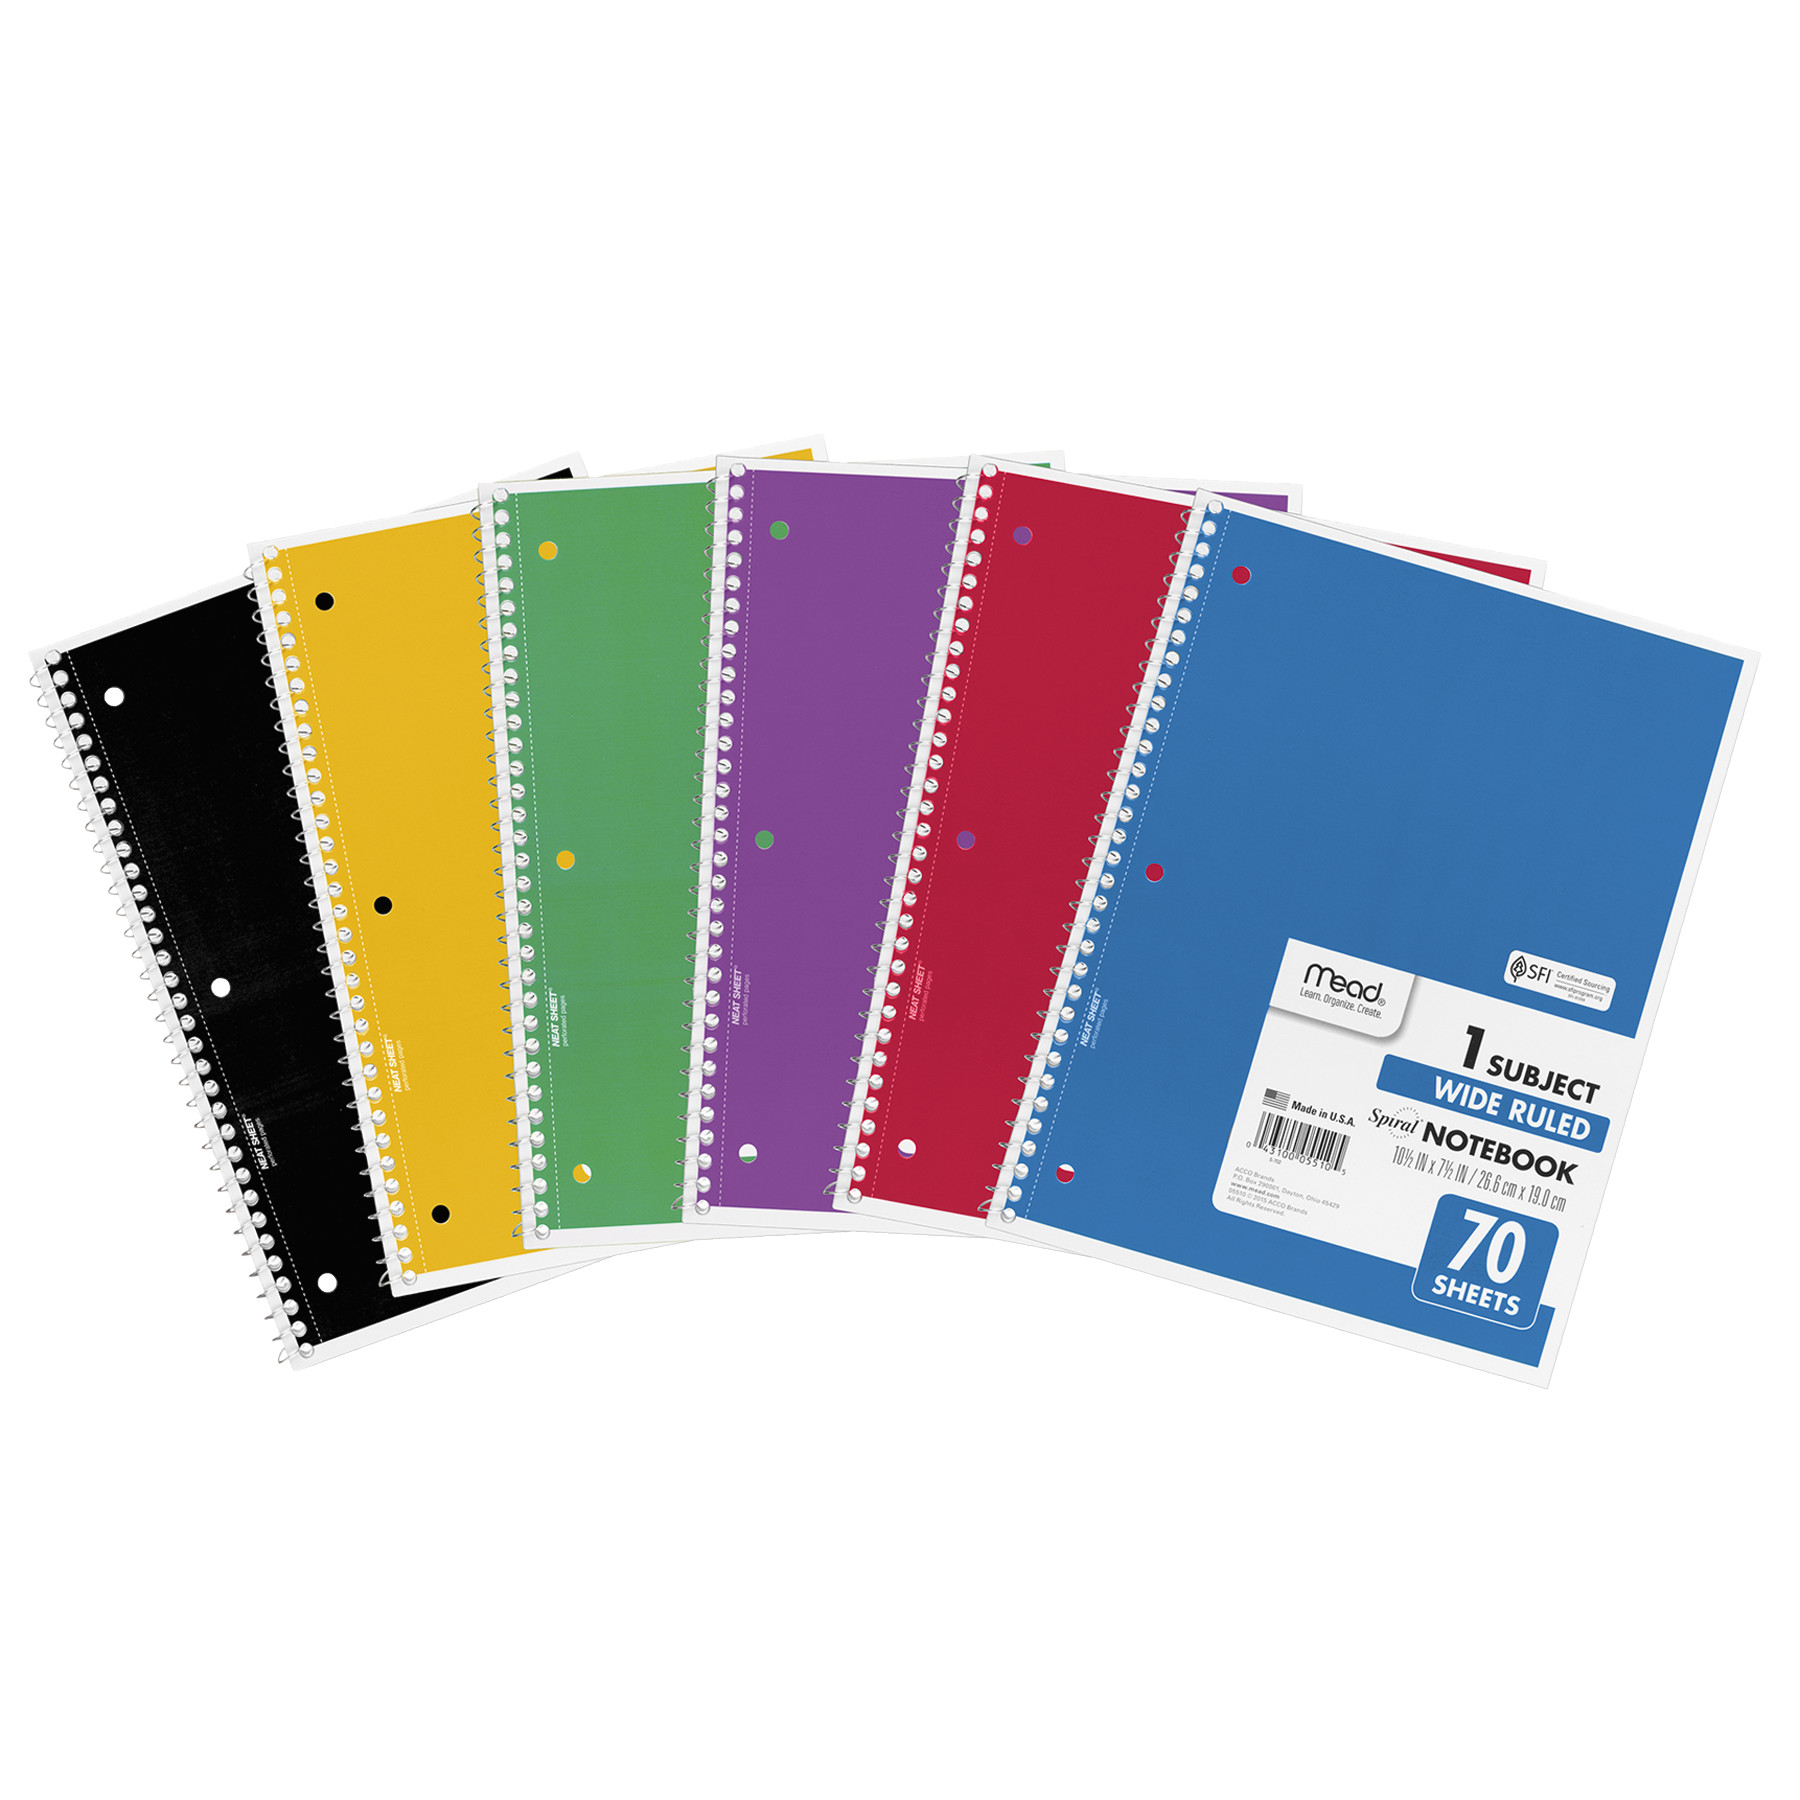 Mead One Subject Notebook - 70 Sheet - Wide Ruled - 8" X 10.50"(MEA05510), Assorted Colors Covers, Single Notebook - image 1 of 2